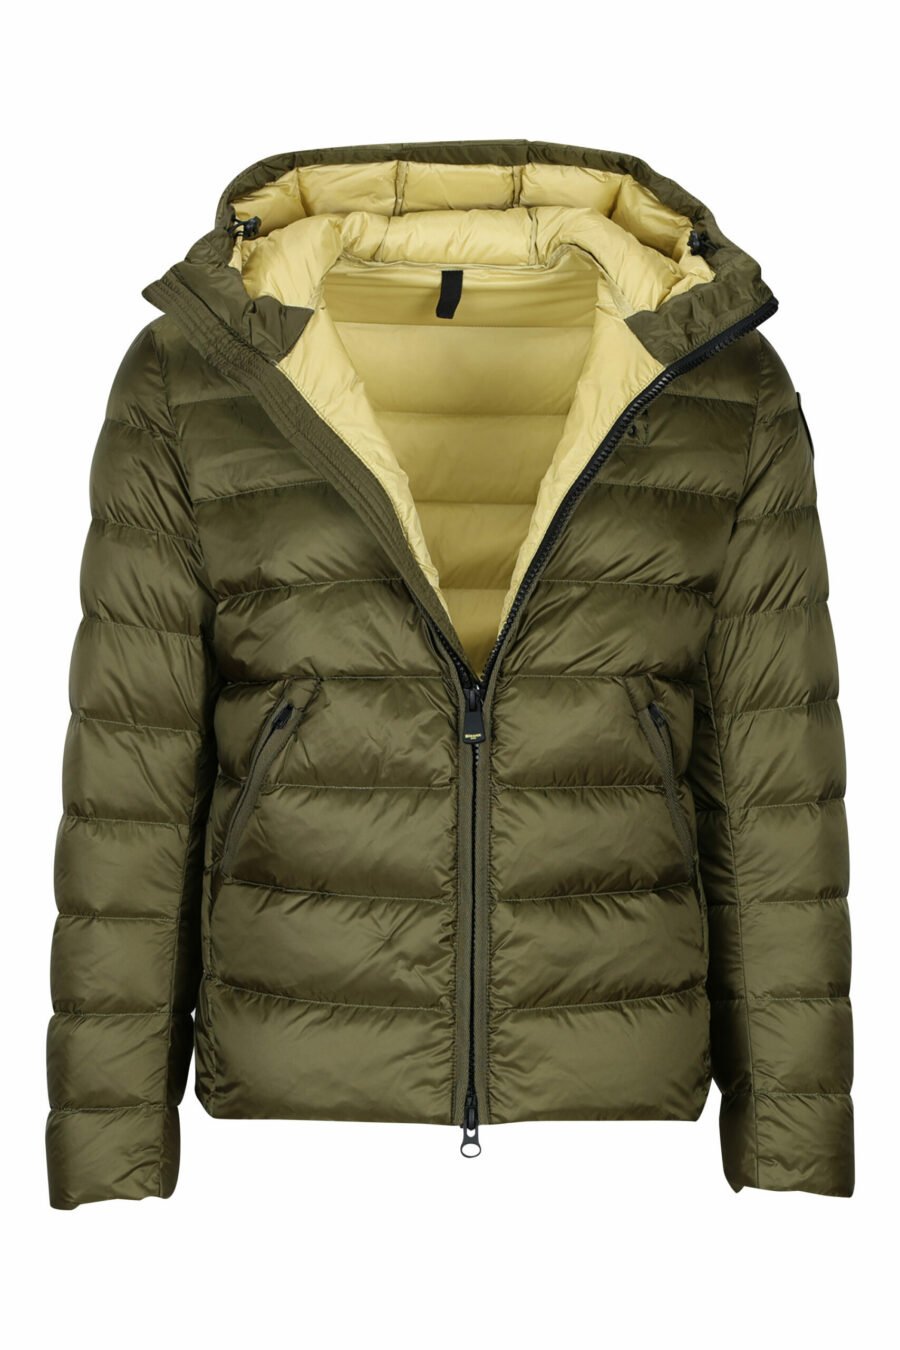 Military green hooded jacket with straight lines and yellow inside - 8058610657482 1 scaled